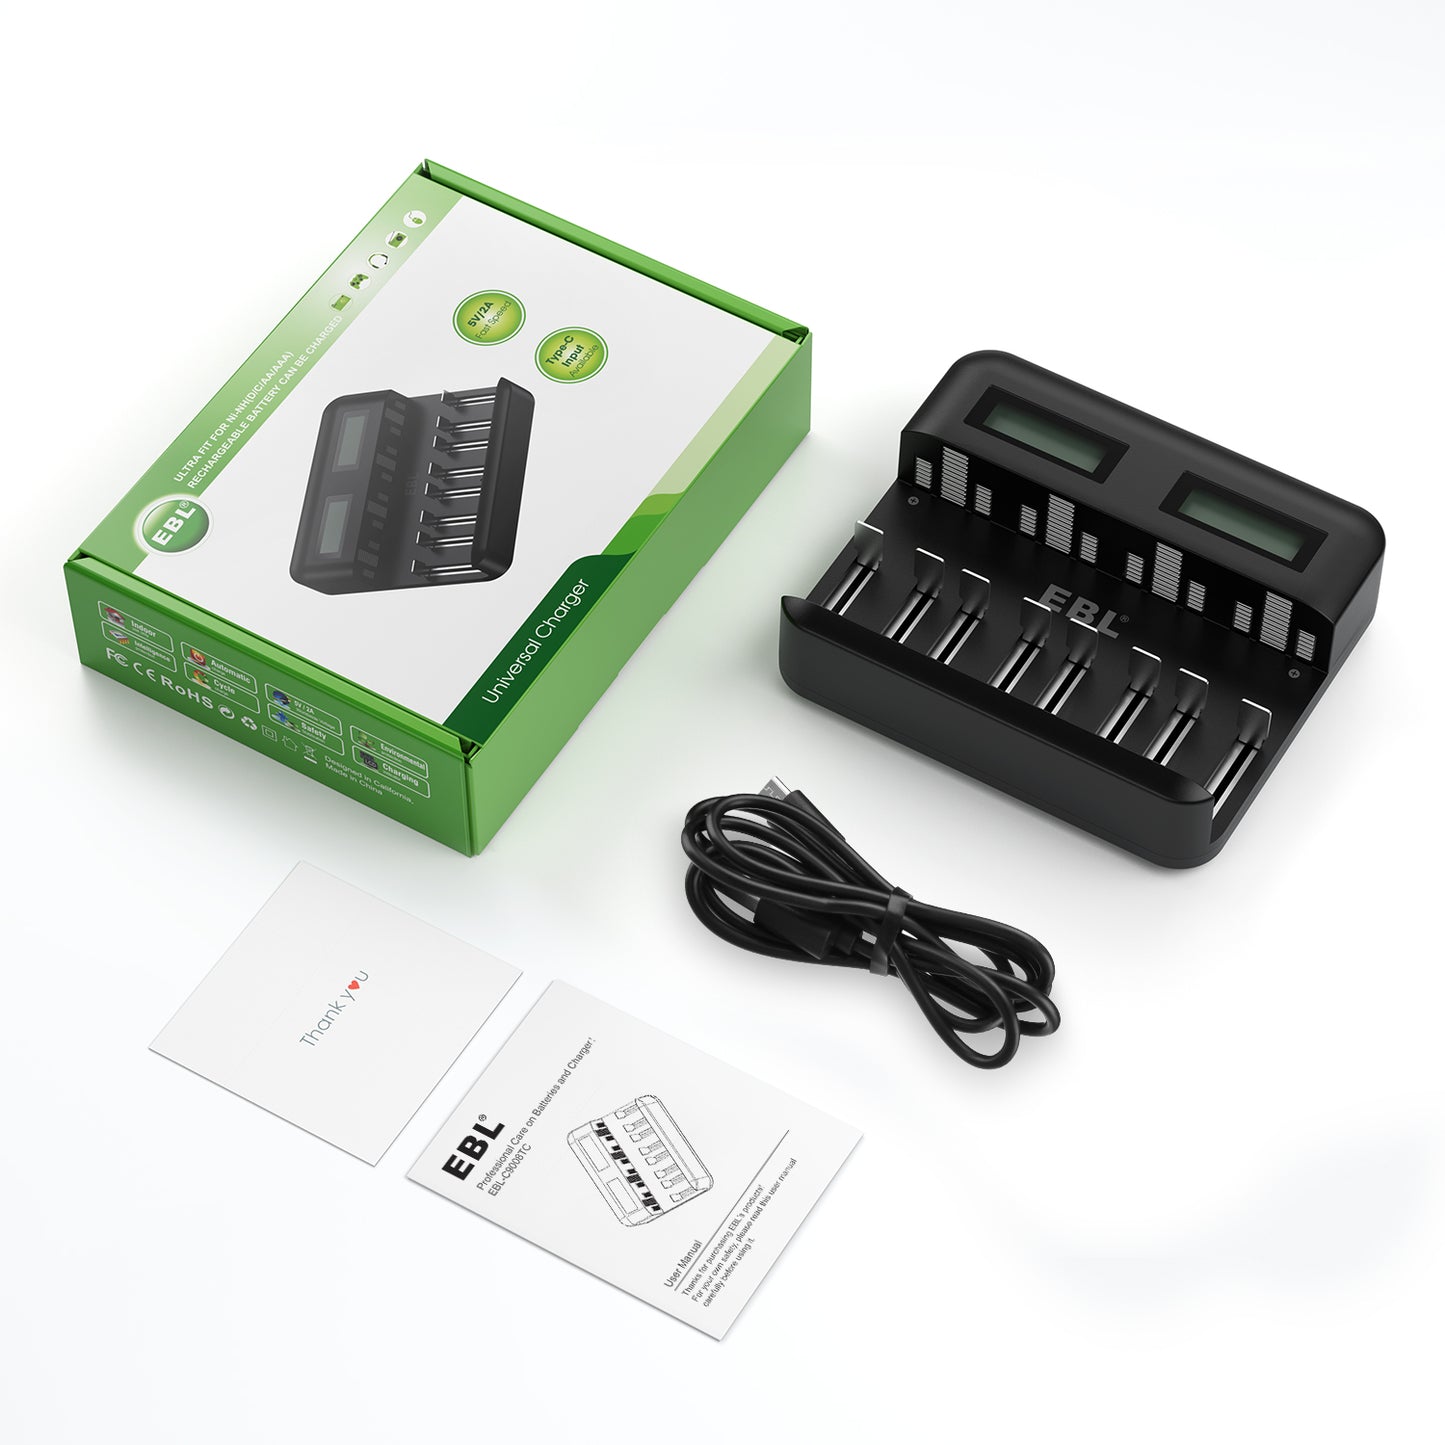 EBL TB-6431 8-Bay Universal Battery Charger with LCD Status Display, Independently Controlled Quick Charging Slots, and Built-In Overcharge Protection for AA AAA C D Rechargeable Batteries